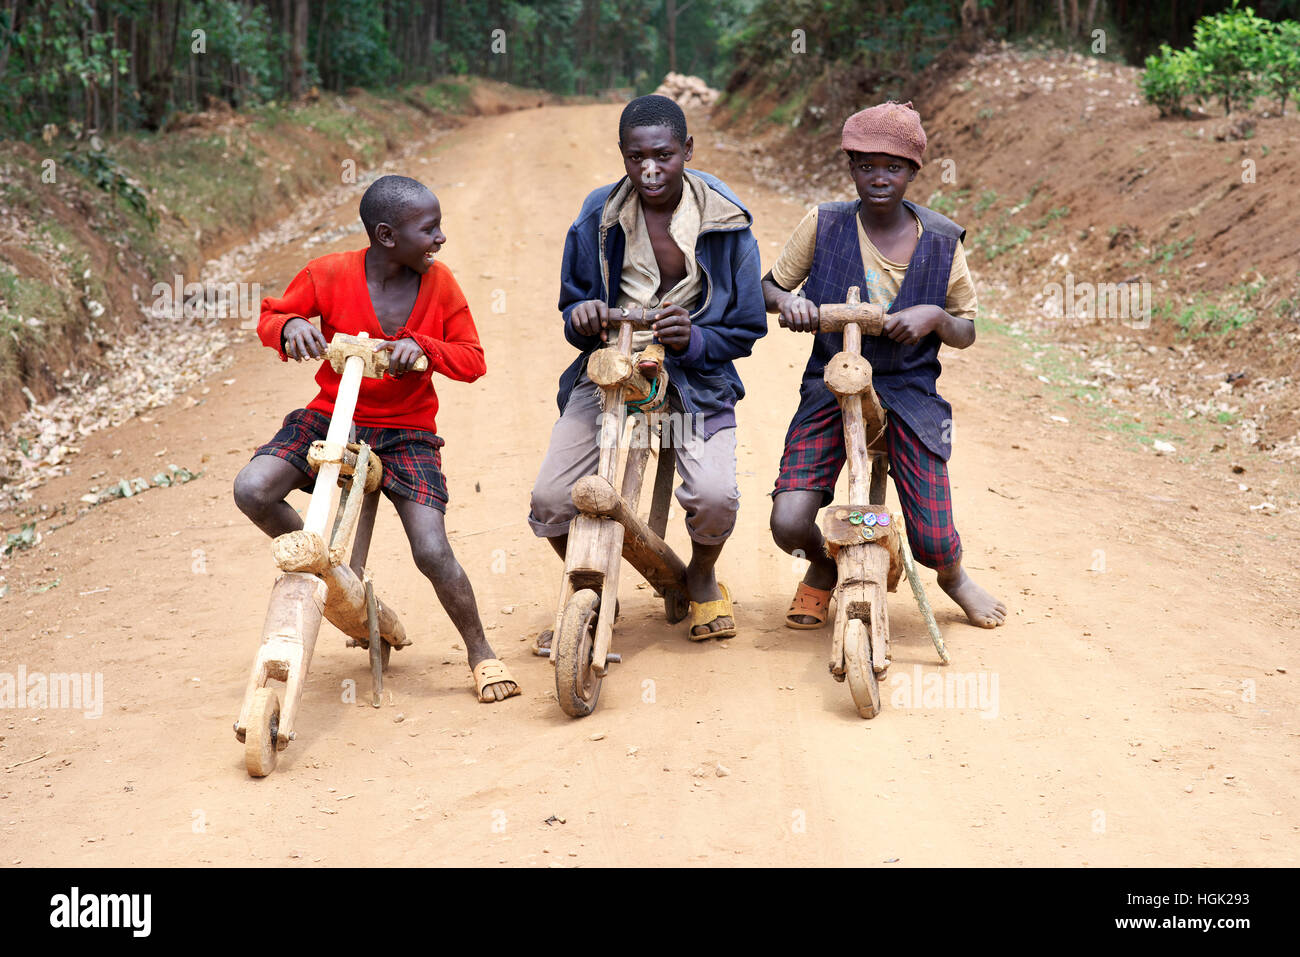 Three young Ugandan children pose for a picture on their wooden bikes in rural Africa Stock Photo